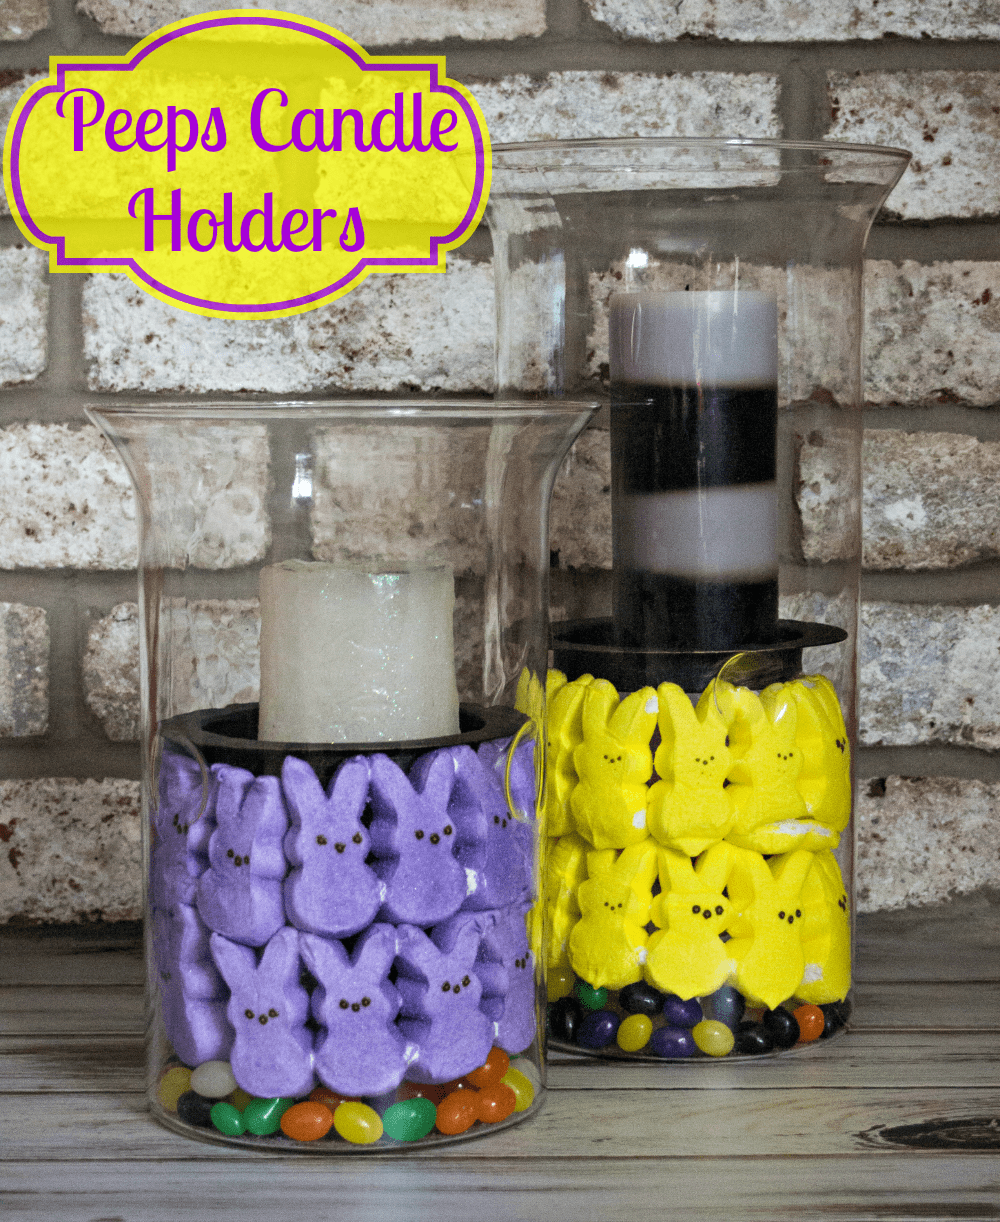 Peeps Candle Holders #easter #craft